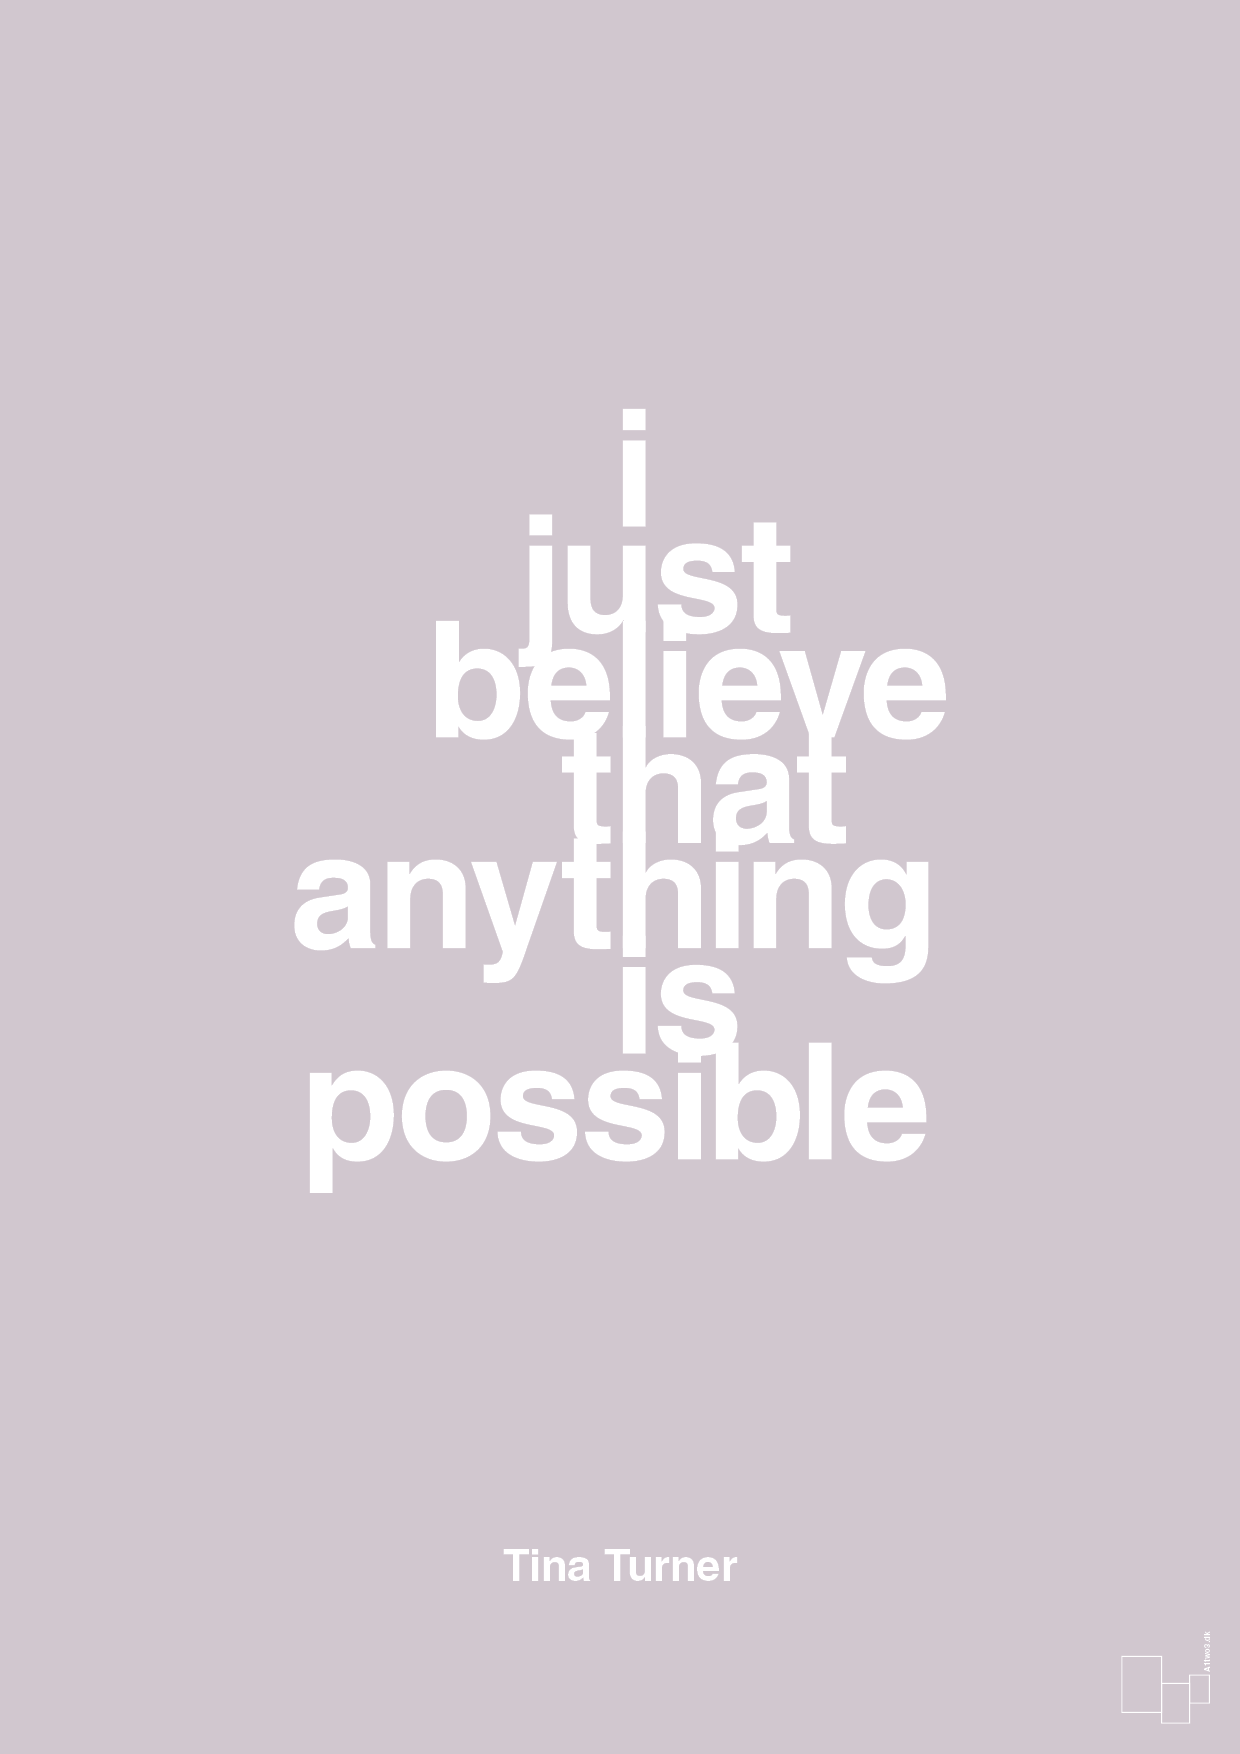 i just believe that anything is possible - Plakat med Citater i Dusty Lilac